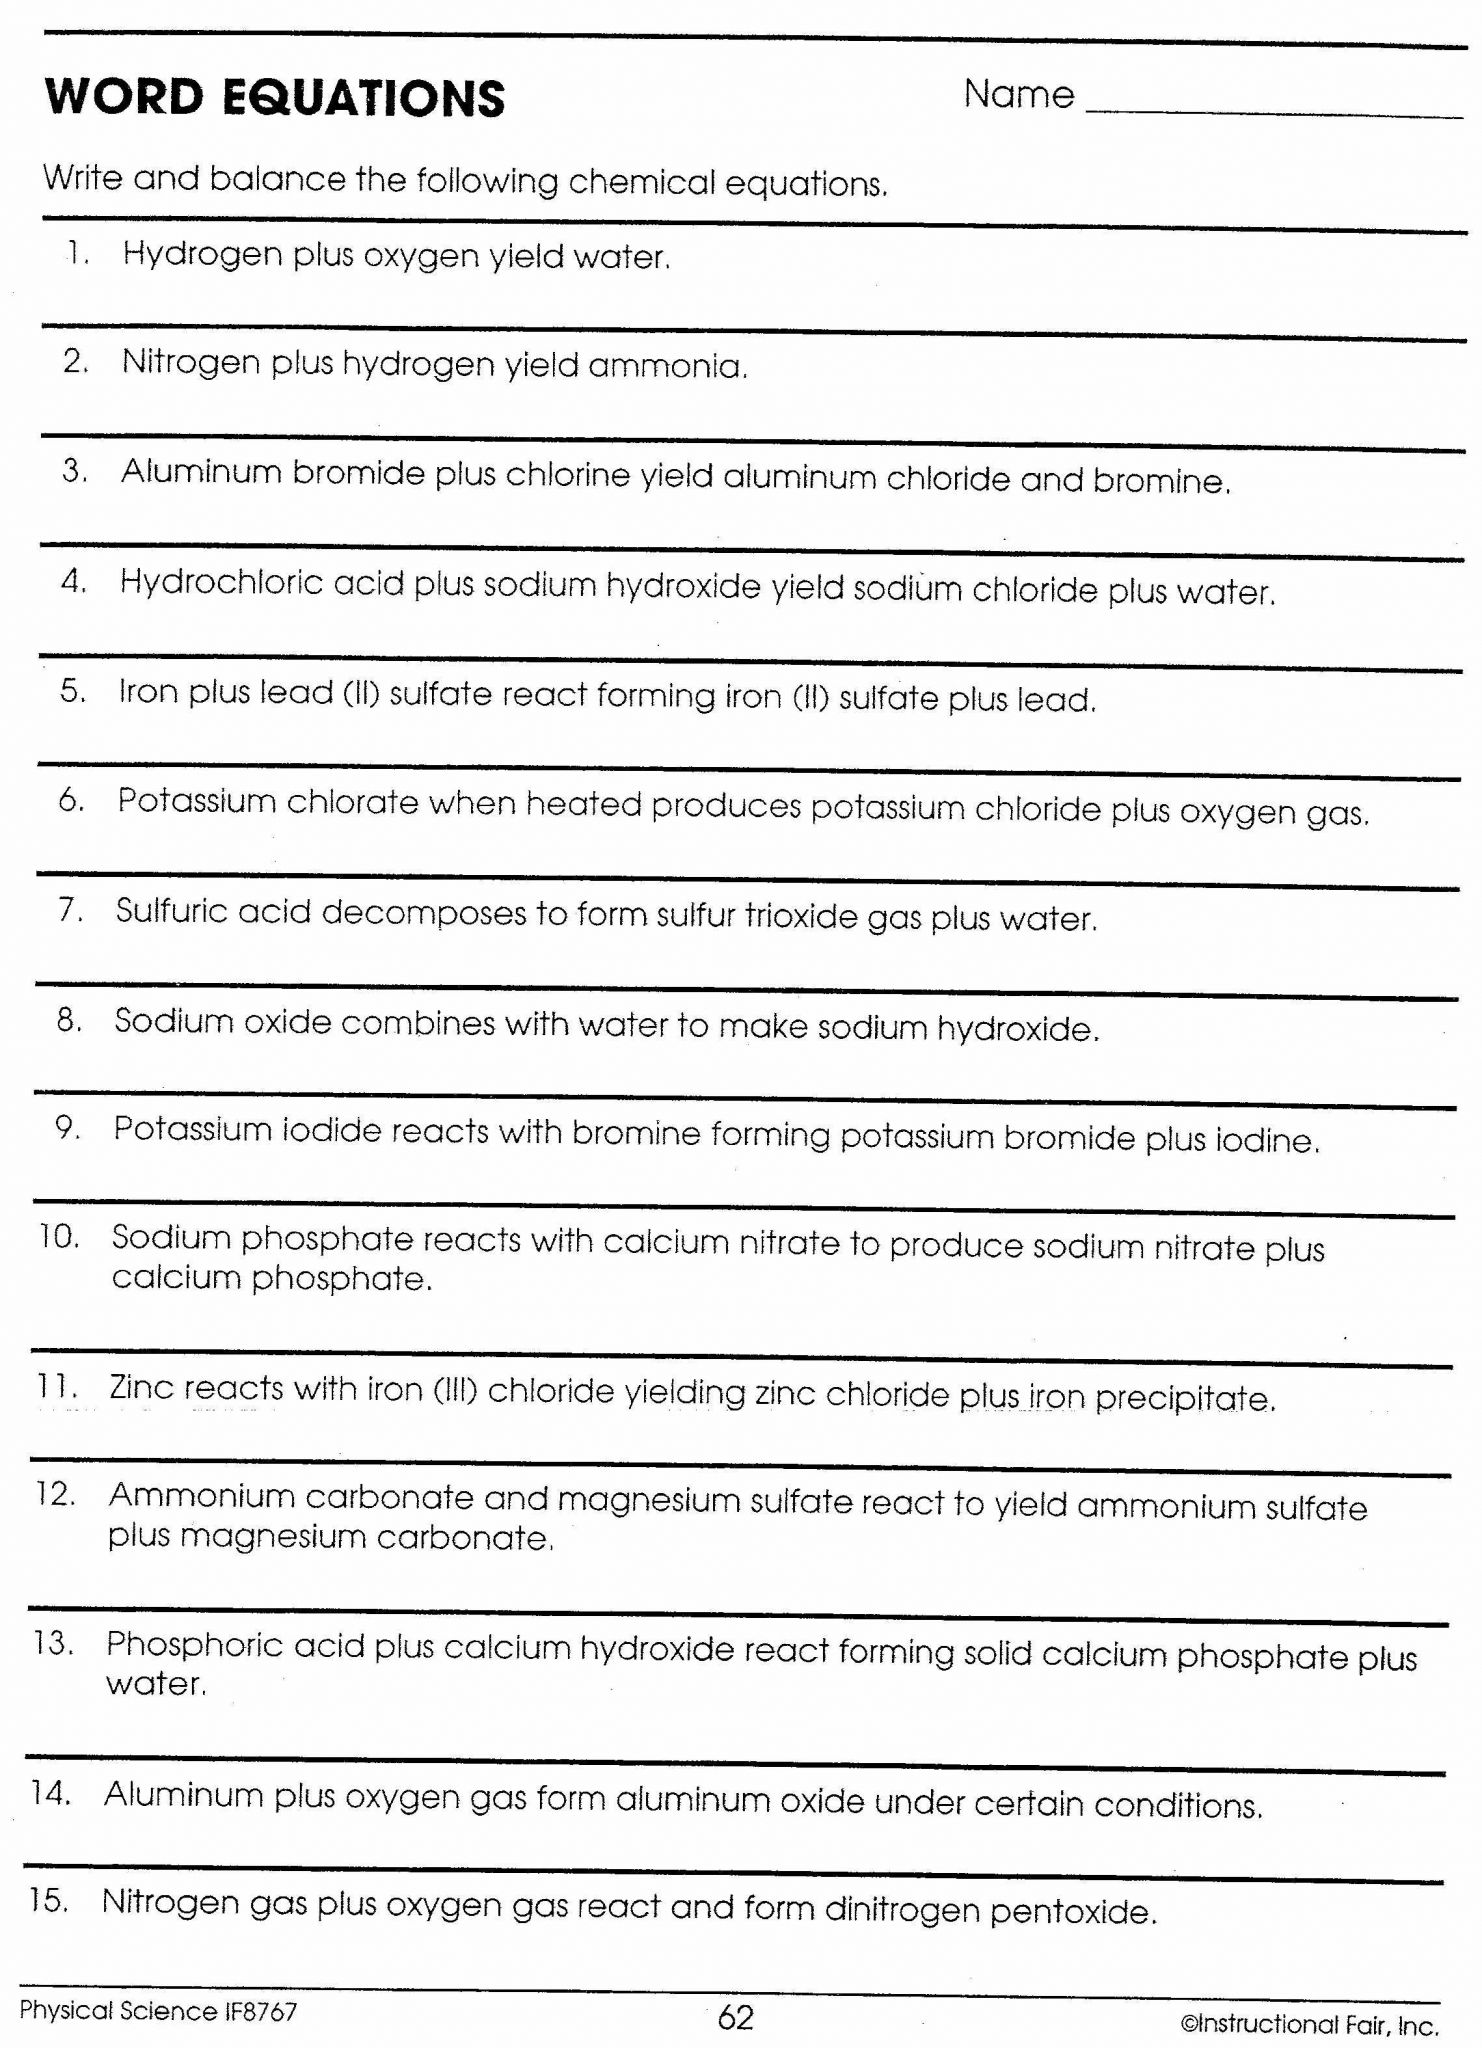 Wave Equation Worksheet Answer Key Also the Math Chemistry Worksheet Answers